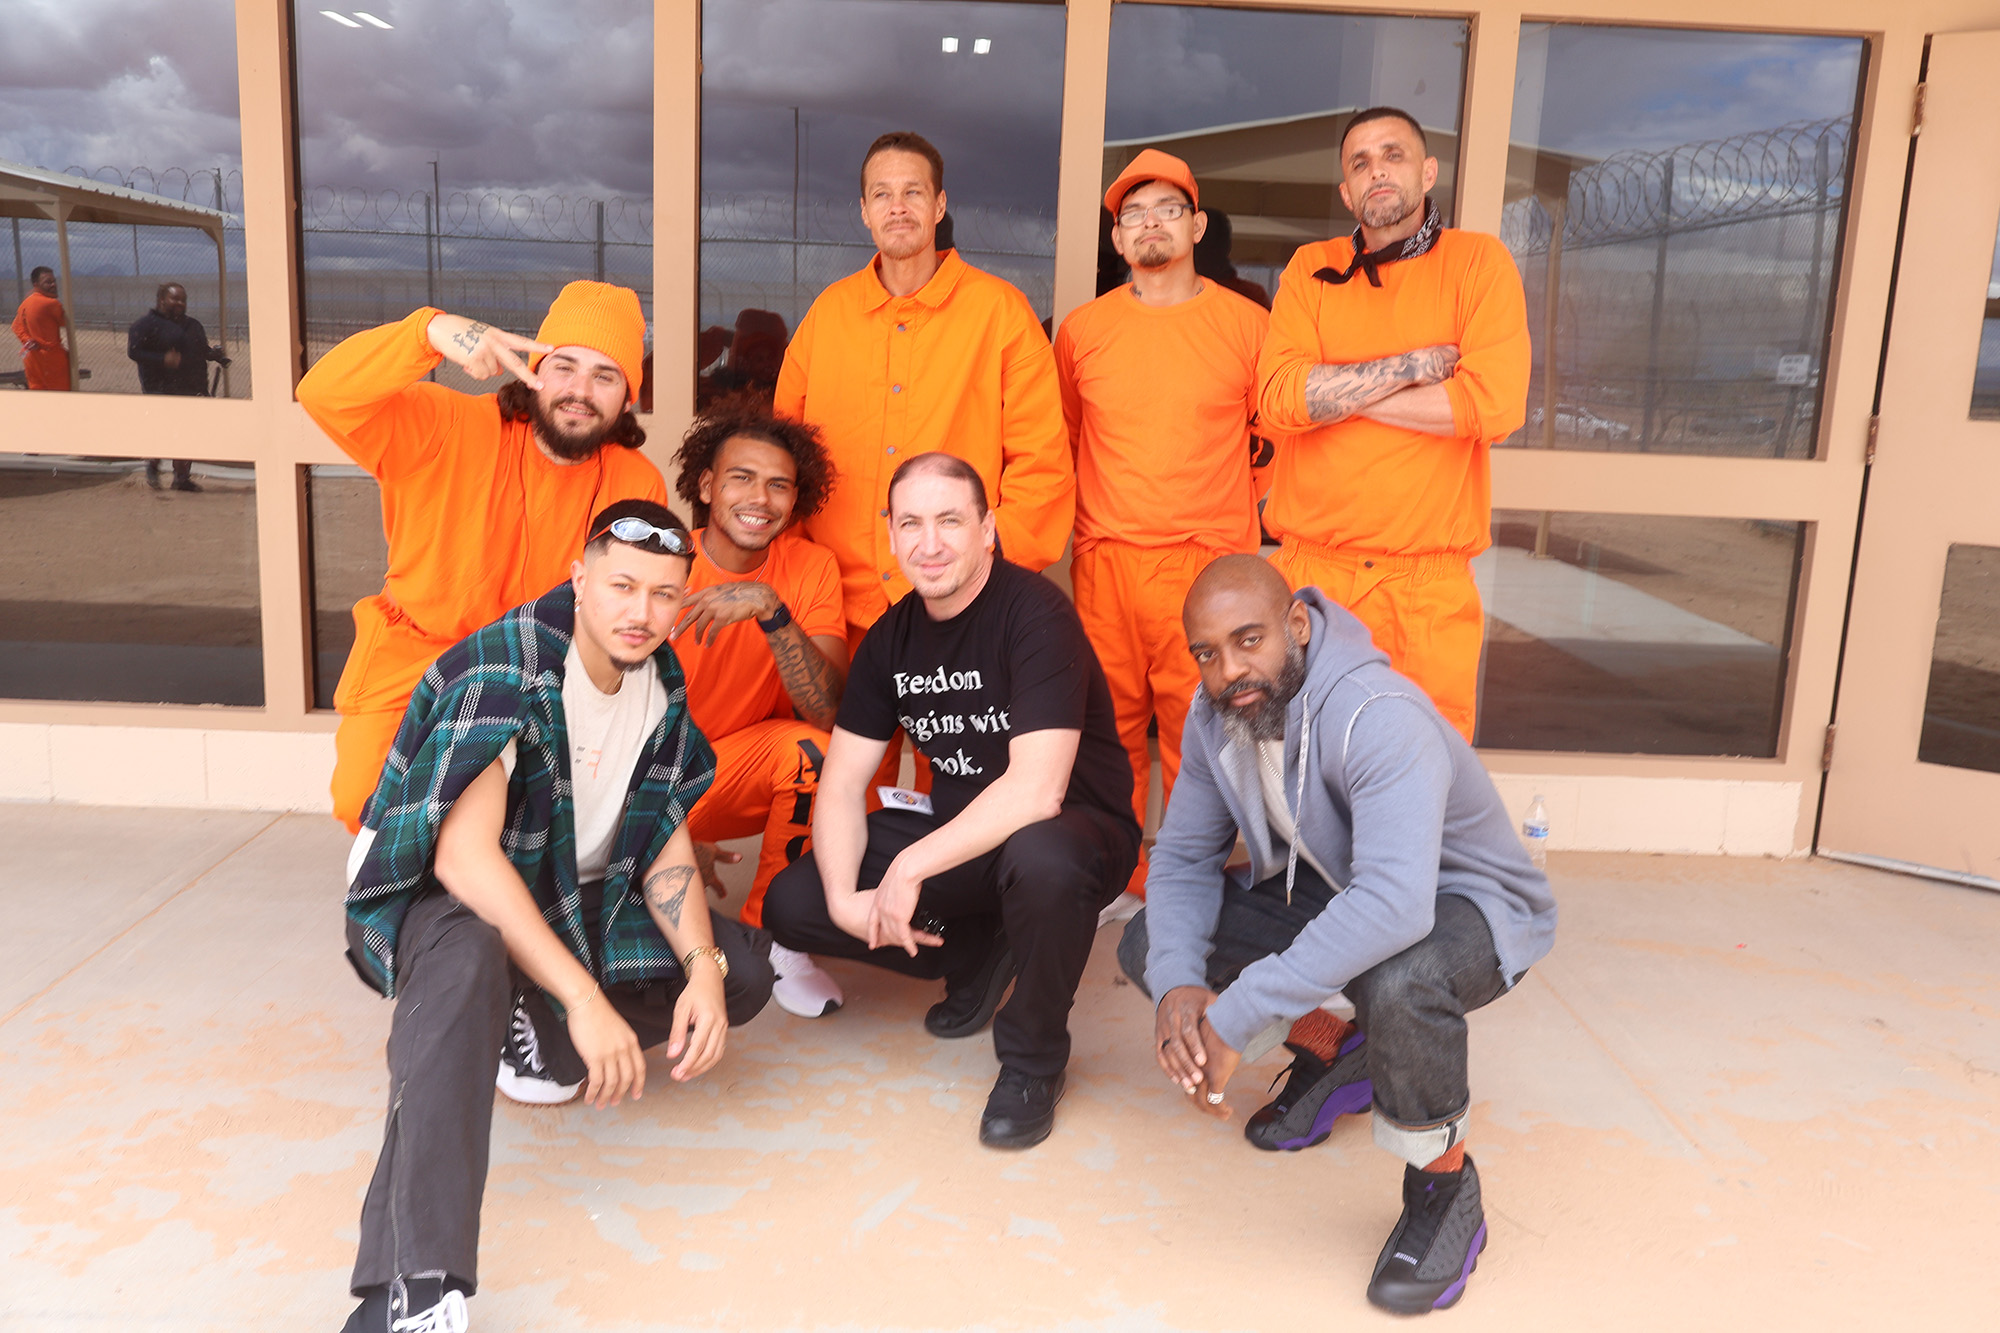 David (lower left), Freedom Reads Founder & CEO Reginald Dwayne Betts (lower right), and Freedom Reads Program Coordinator Steven Parkhurst (lower middle) with men at Arizona State Prison Complex - Yuma.